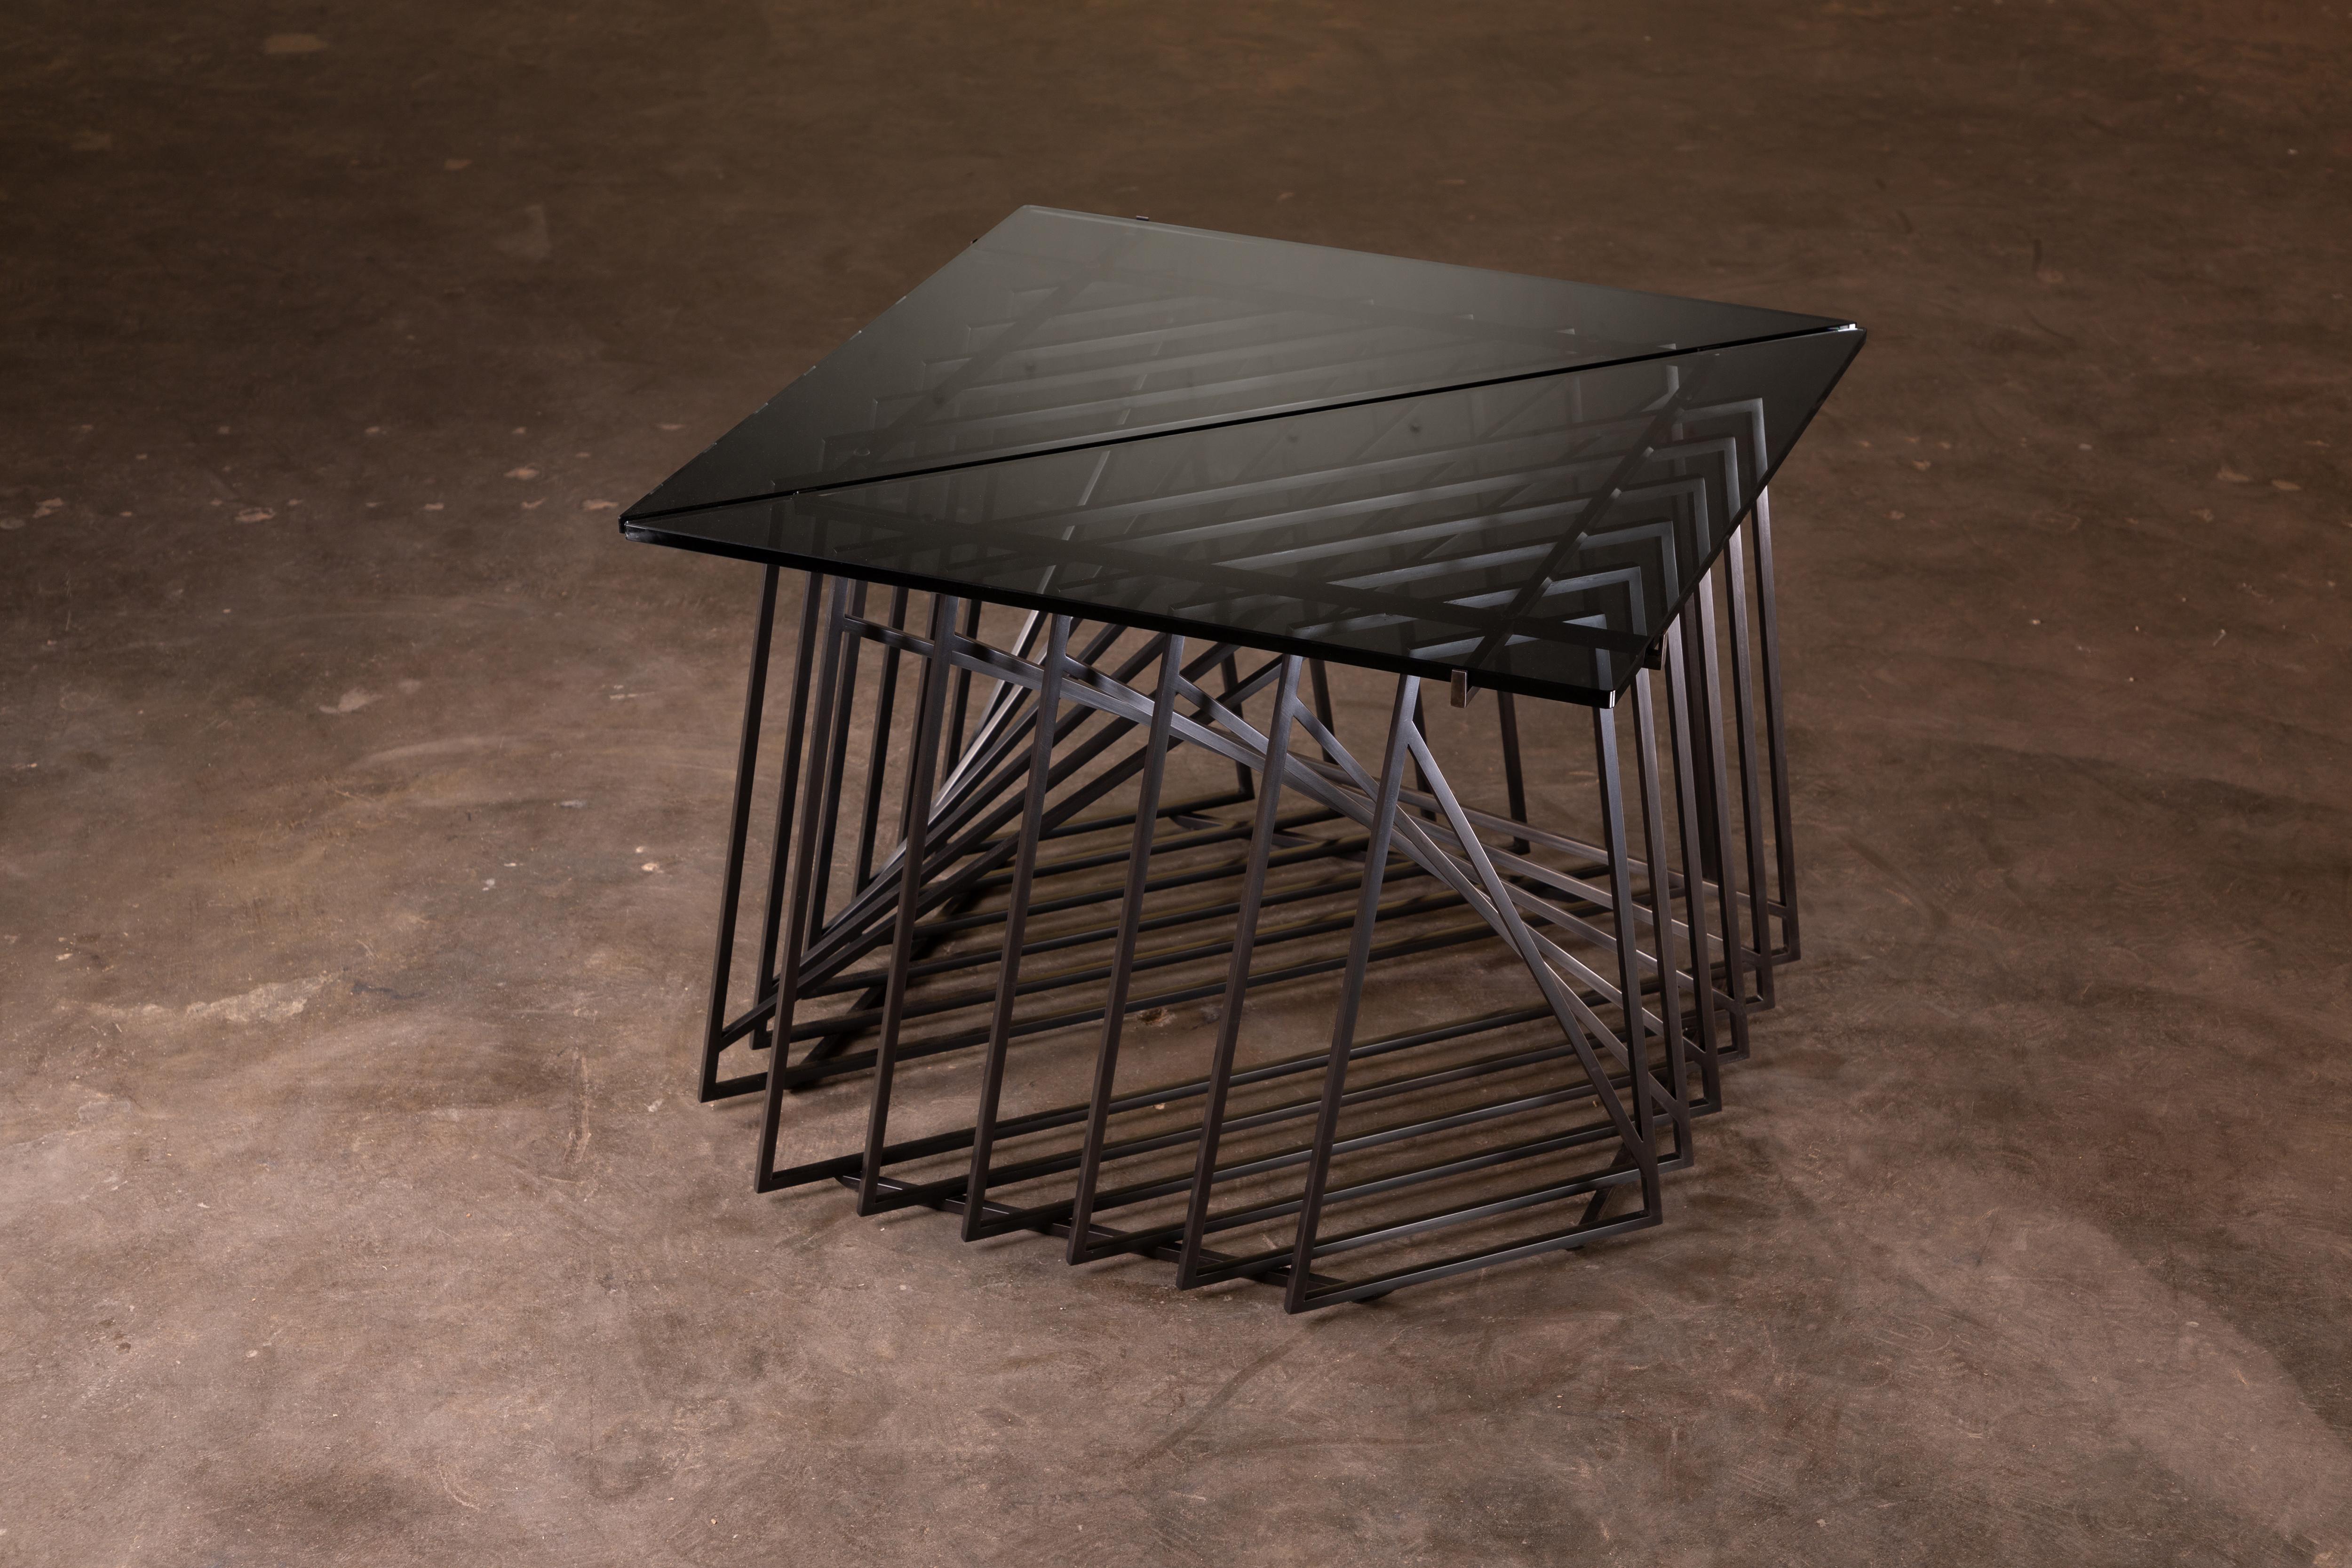 The Nexus Side Tables are a sculptural study, finely constructed and finished with satin black oxide steel and smoked gray glass. Versatile and modular, the triangular tables can be fully customized to be used independently, as a square duo, an